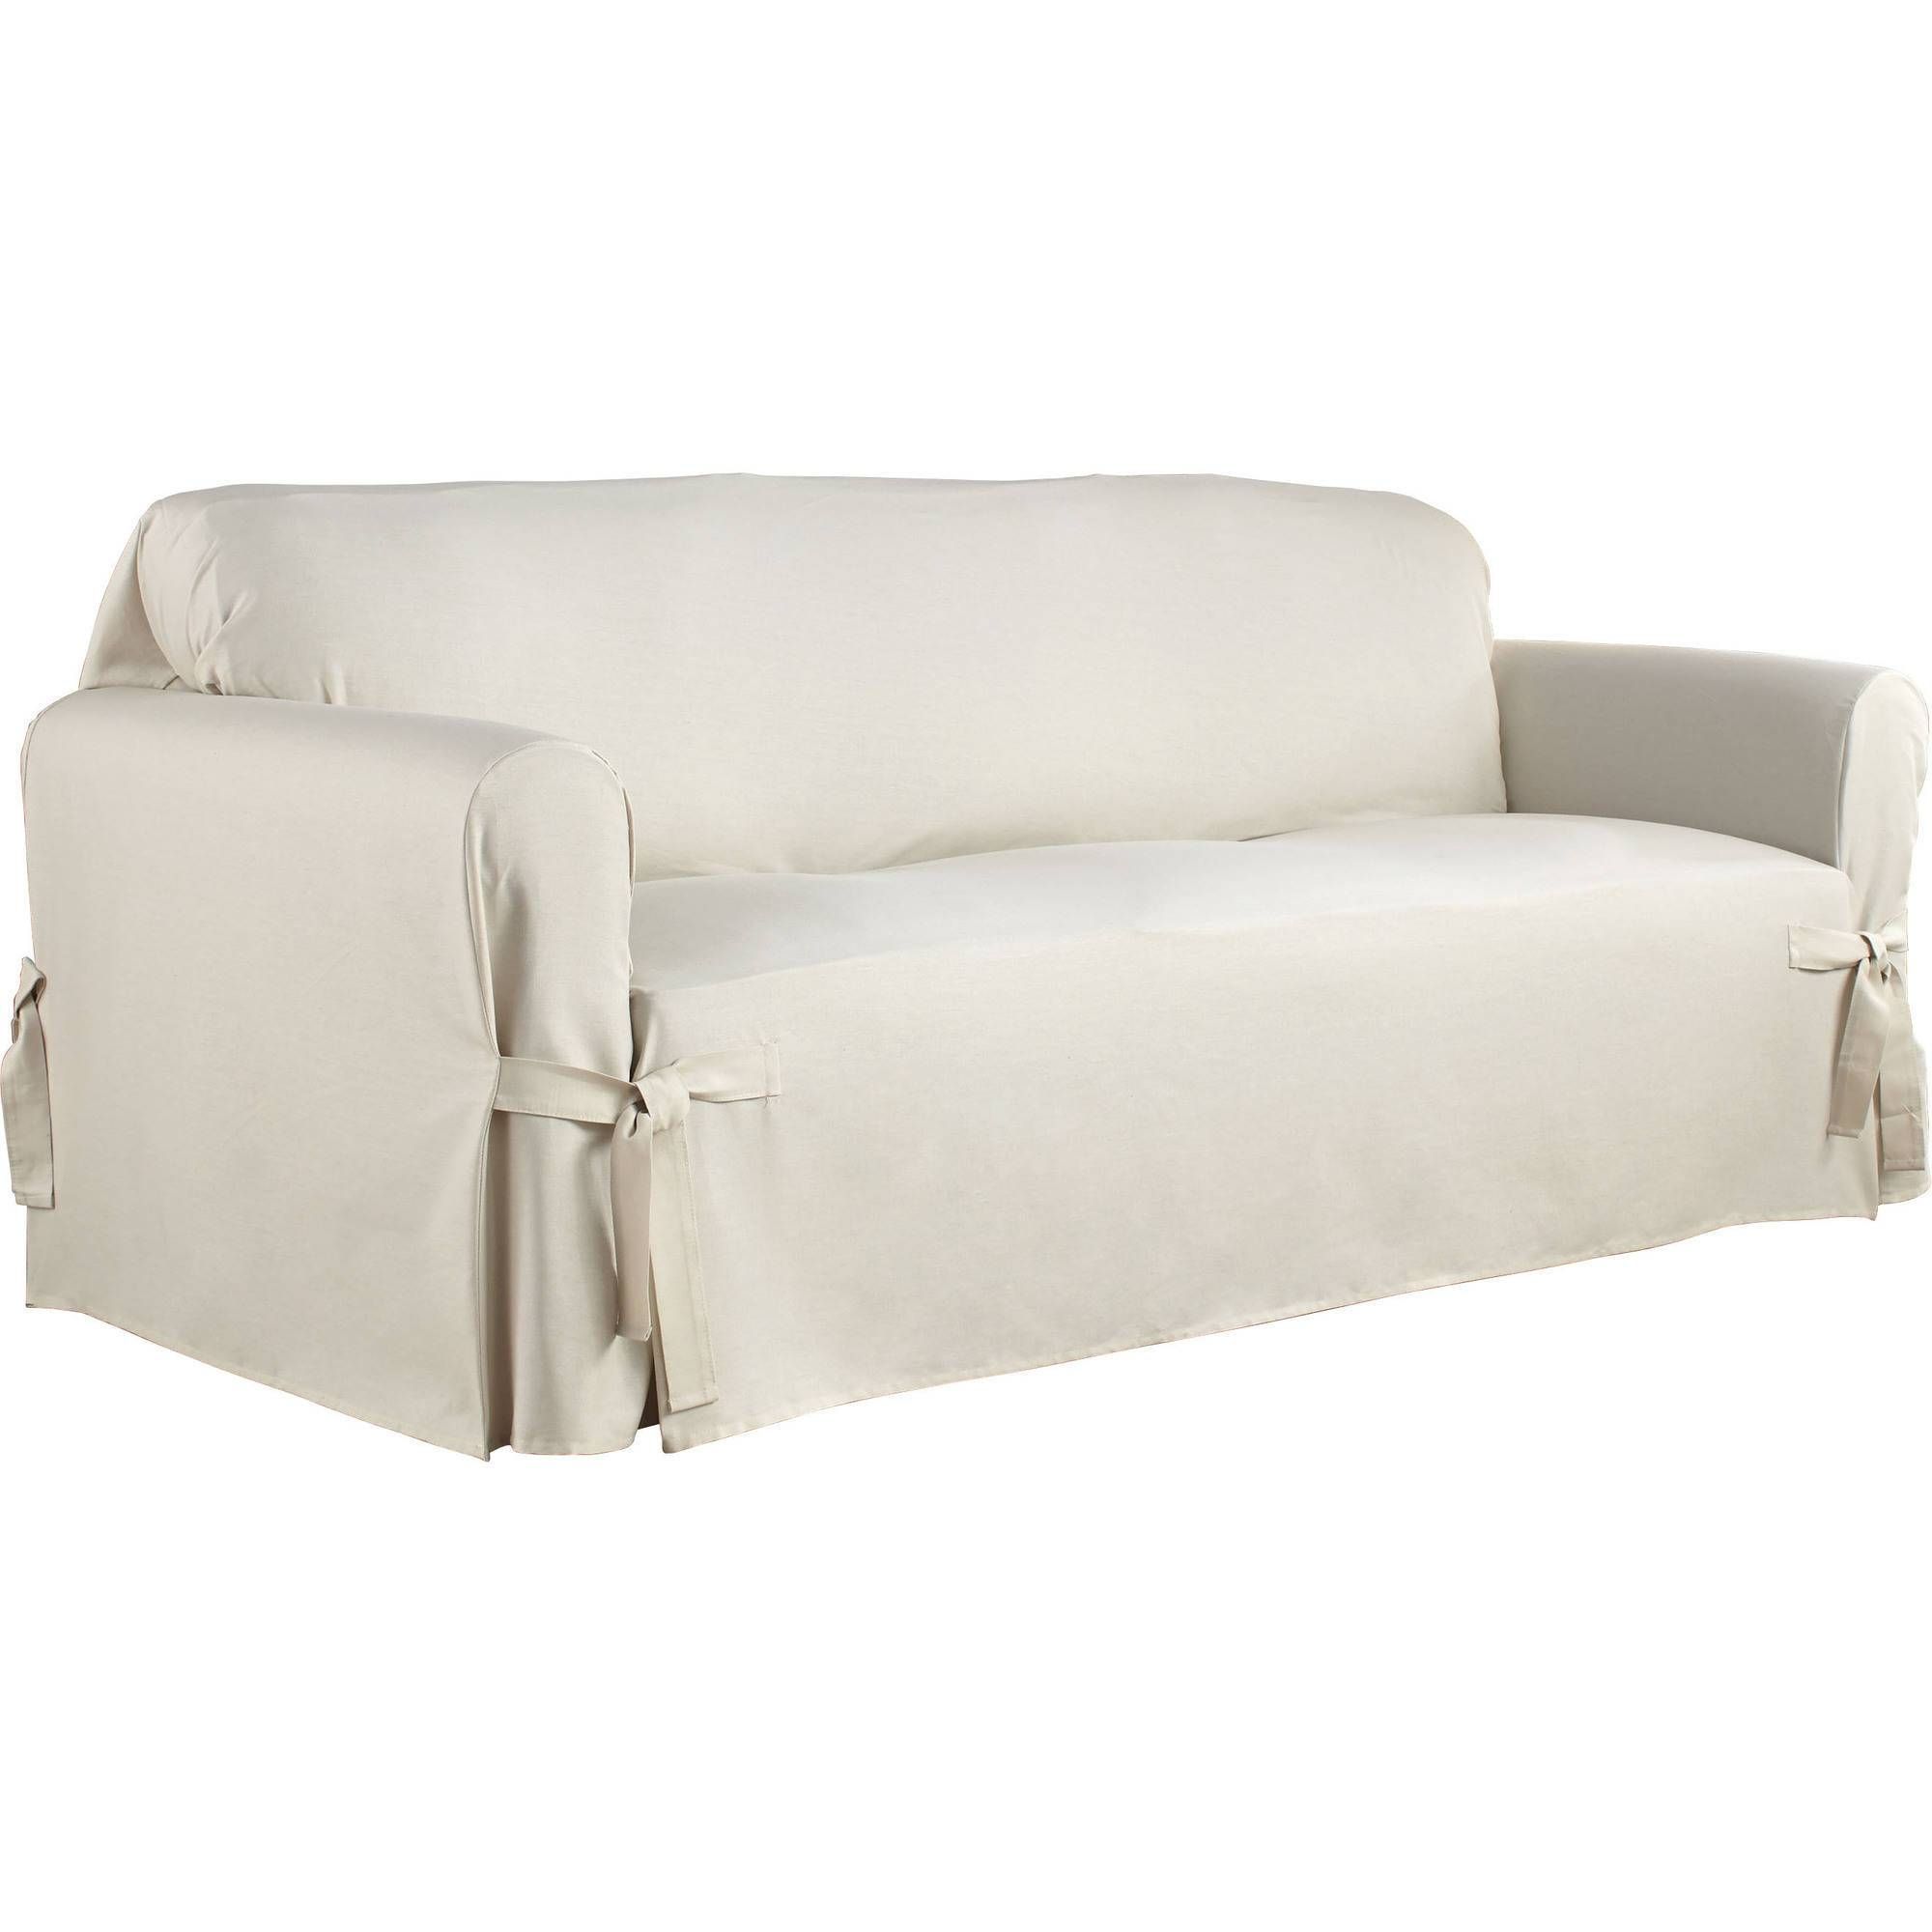 Serta Relaxed Fit Duck Furniture Slipcover, Sofa 1 Piece Box Inside Clearance Sofa Covers (View 13 of 30)